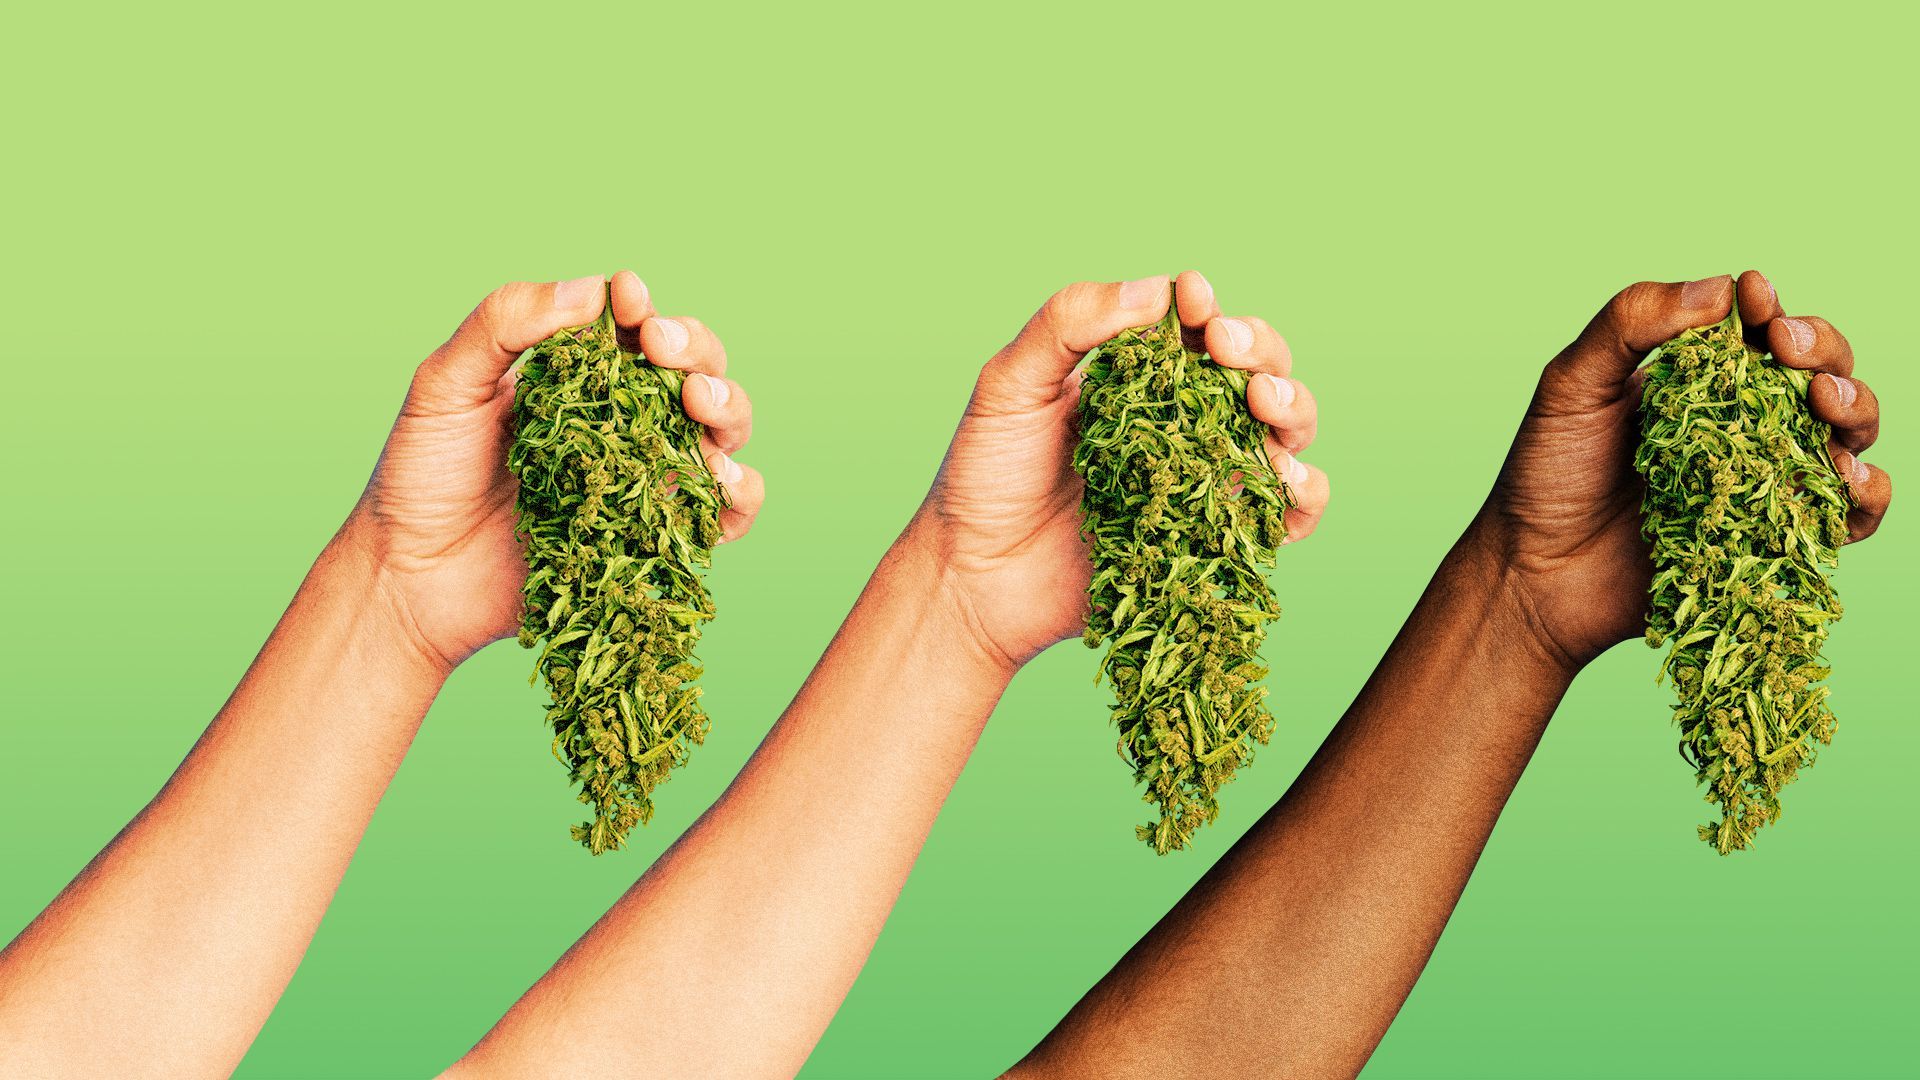 Illustration of three hands holding marijuana leaves, one hand belongs to a Black person.   